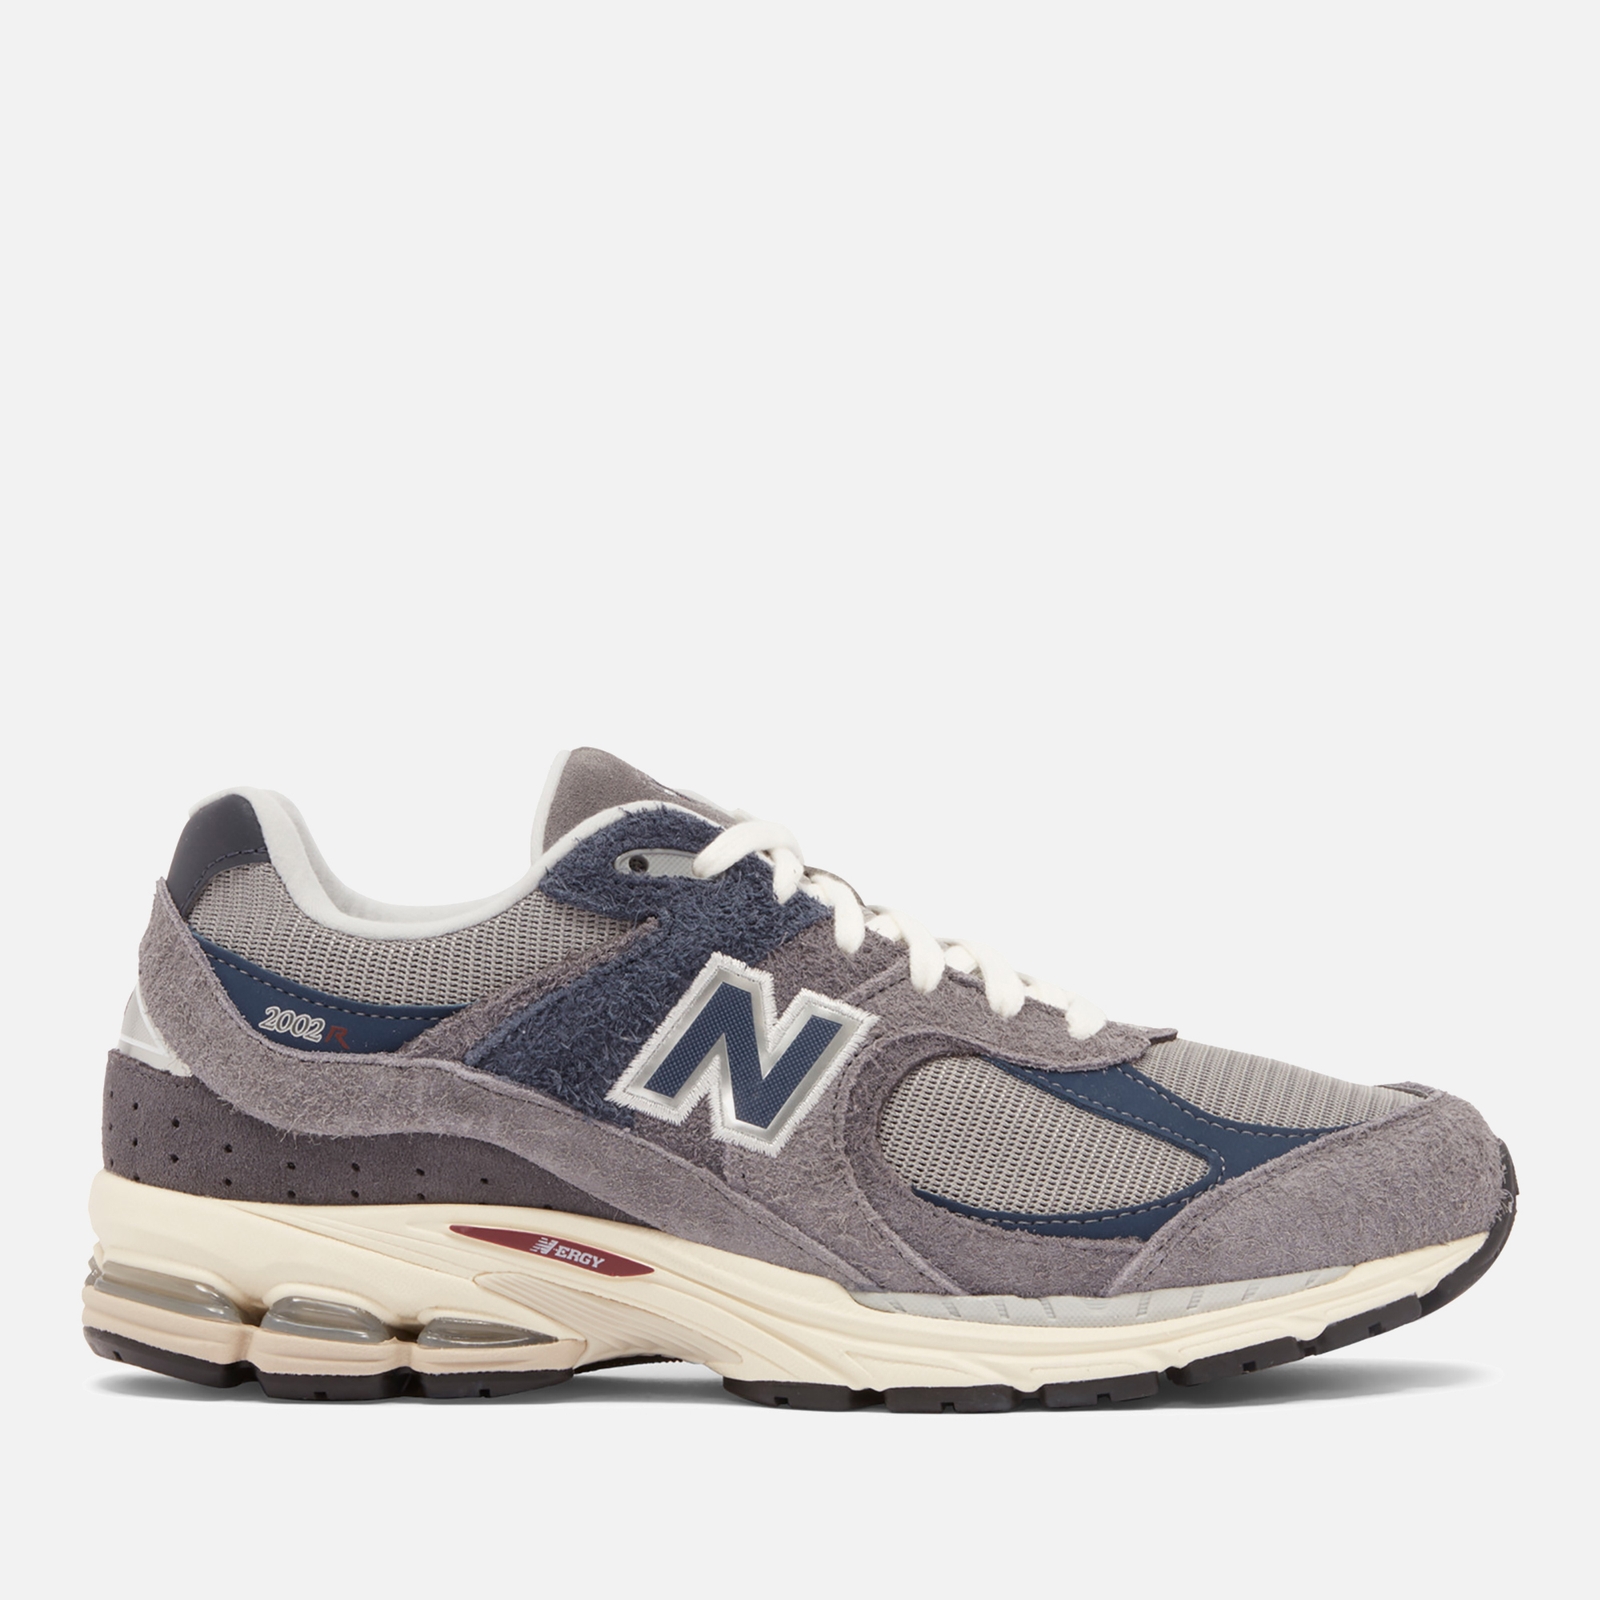 New Balance Men’s 2002r Suede and Mesh Trainers